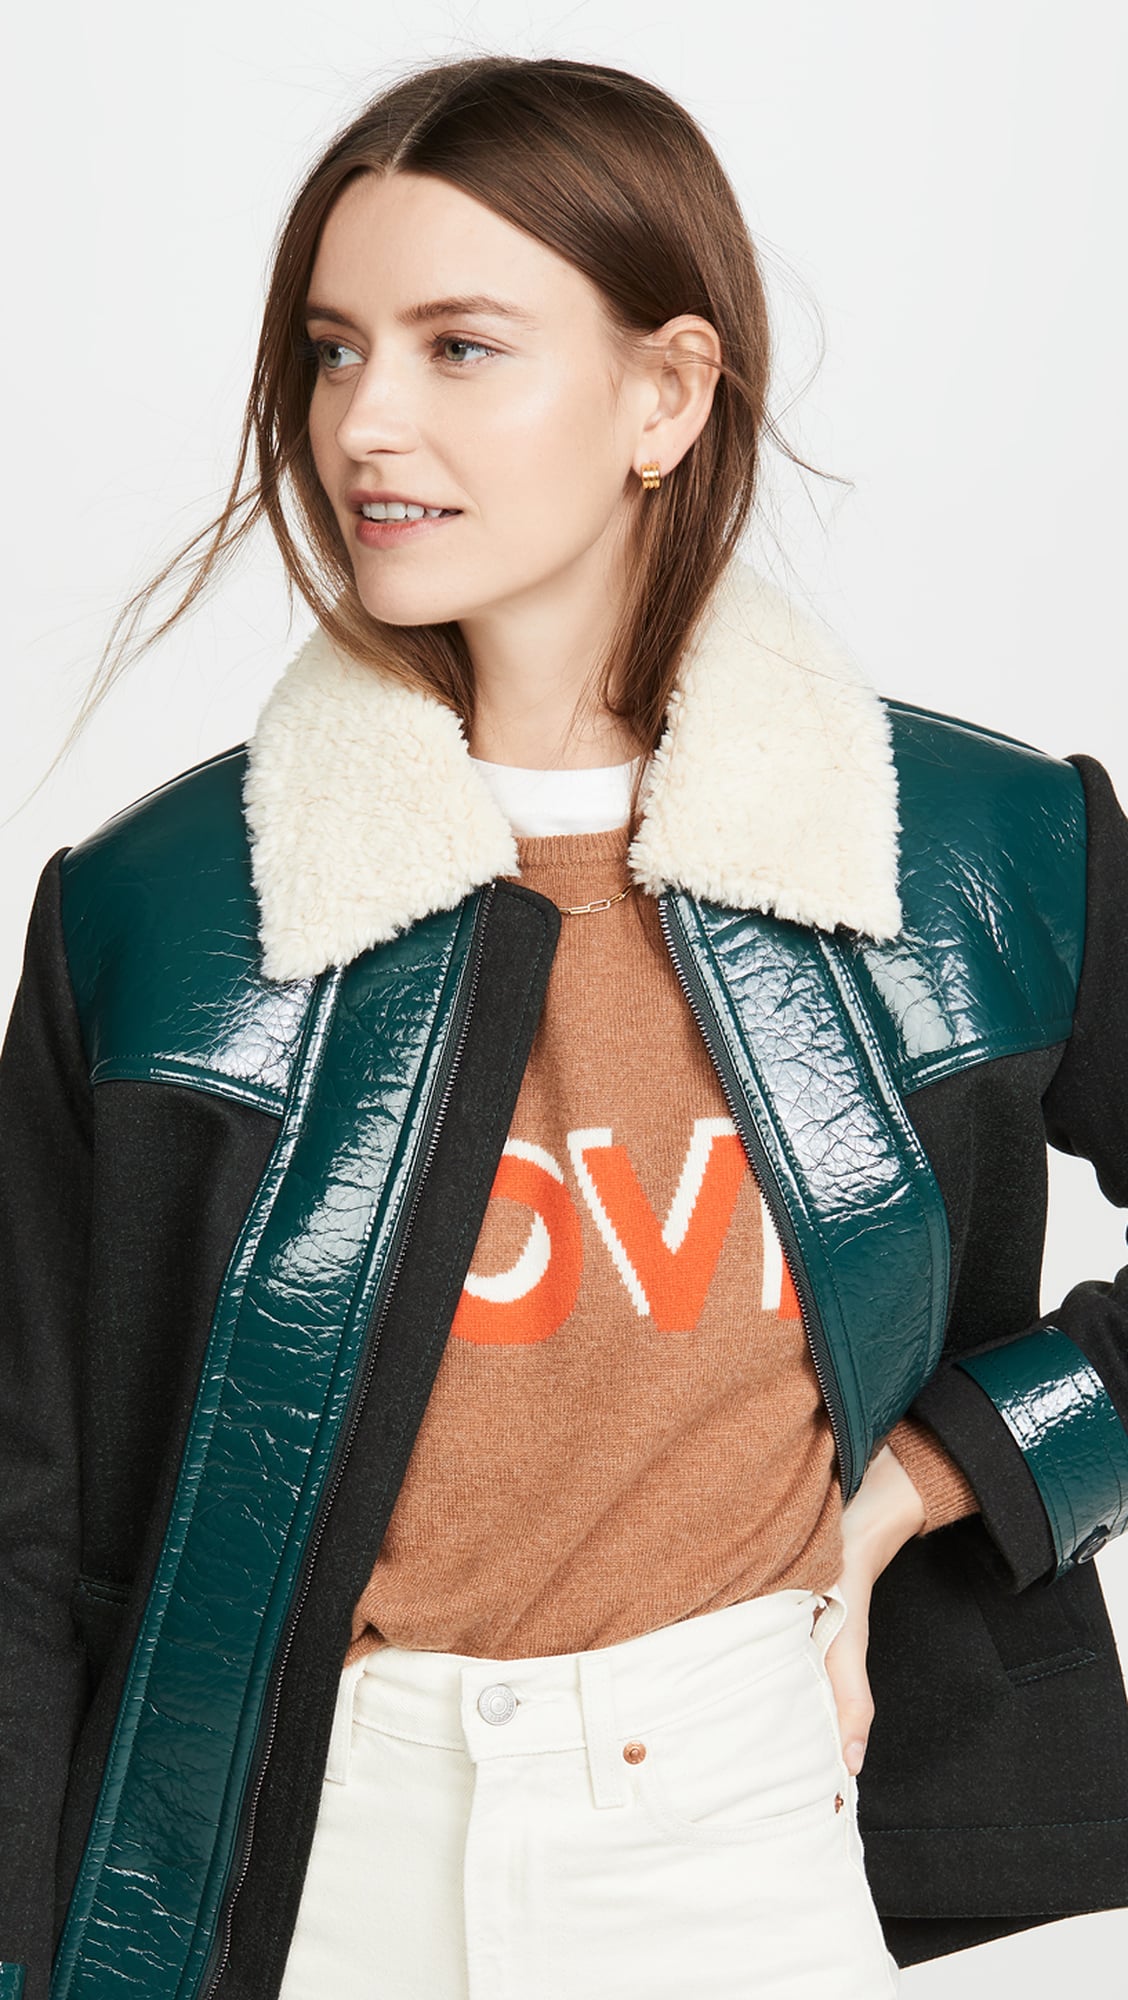 The Most Stylish Outerwear For Women on